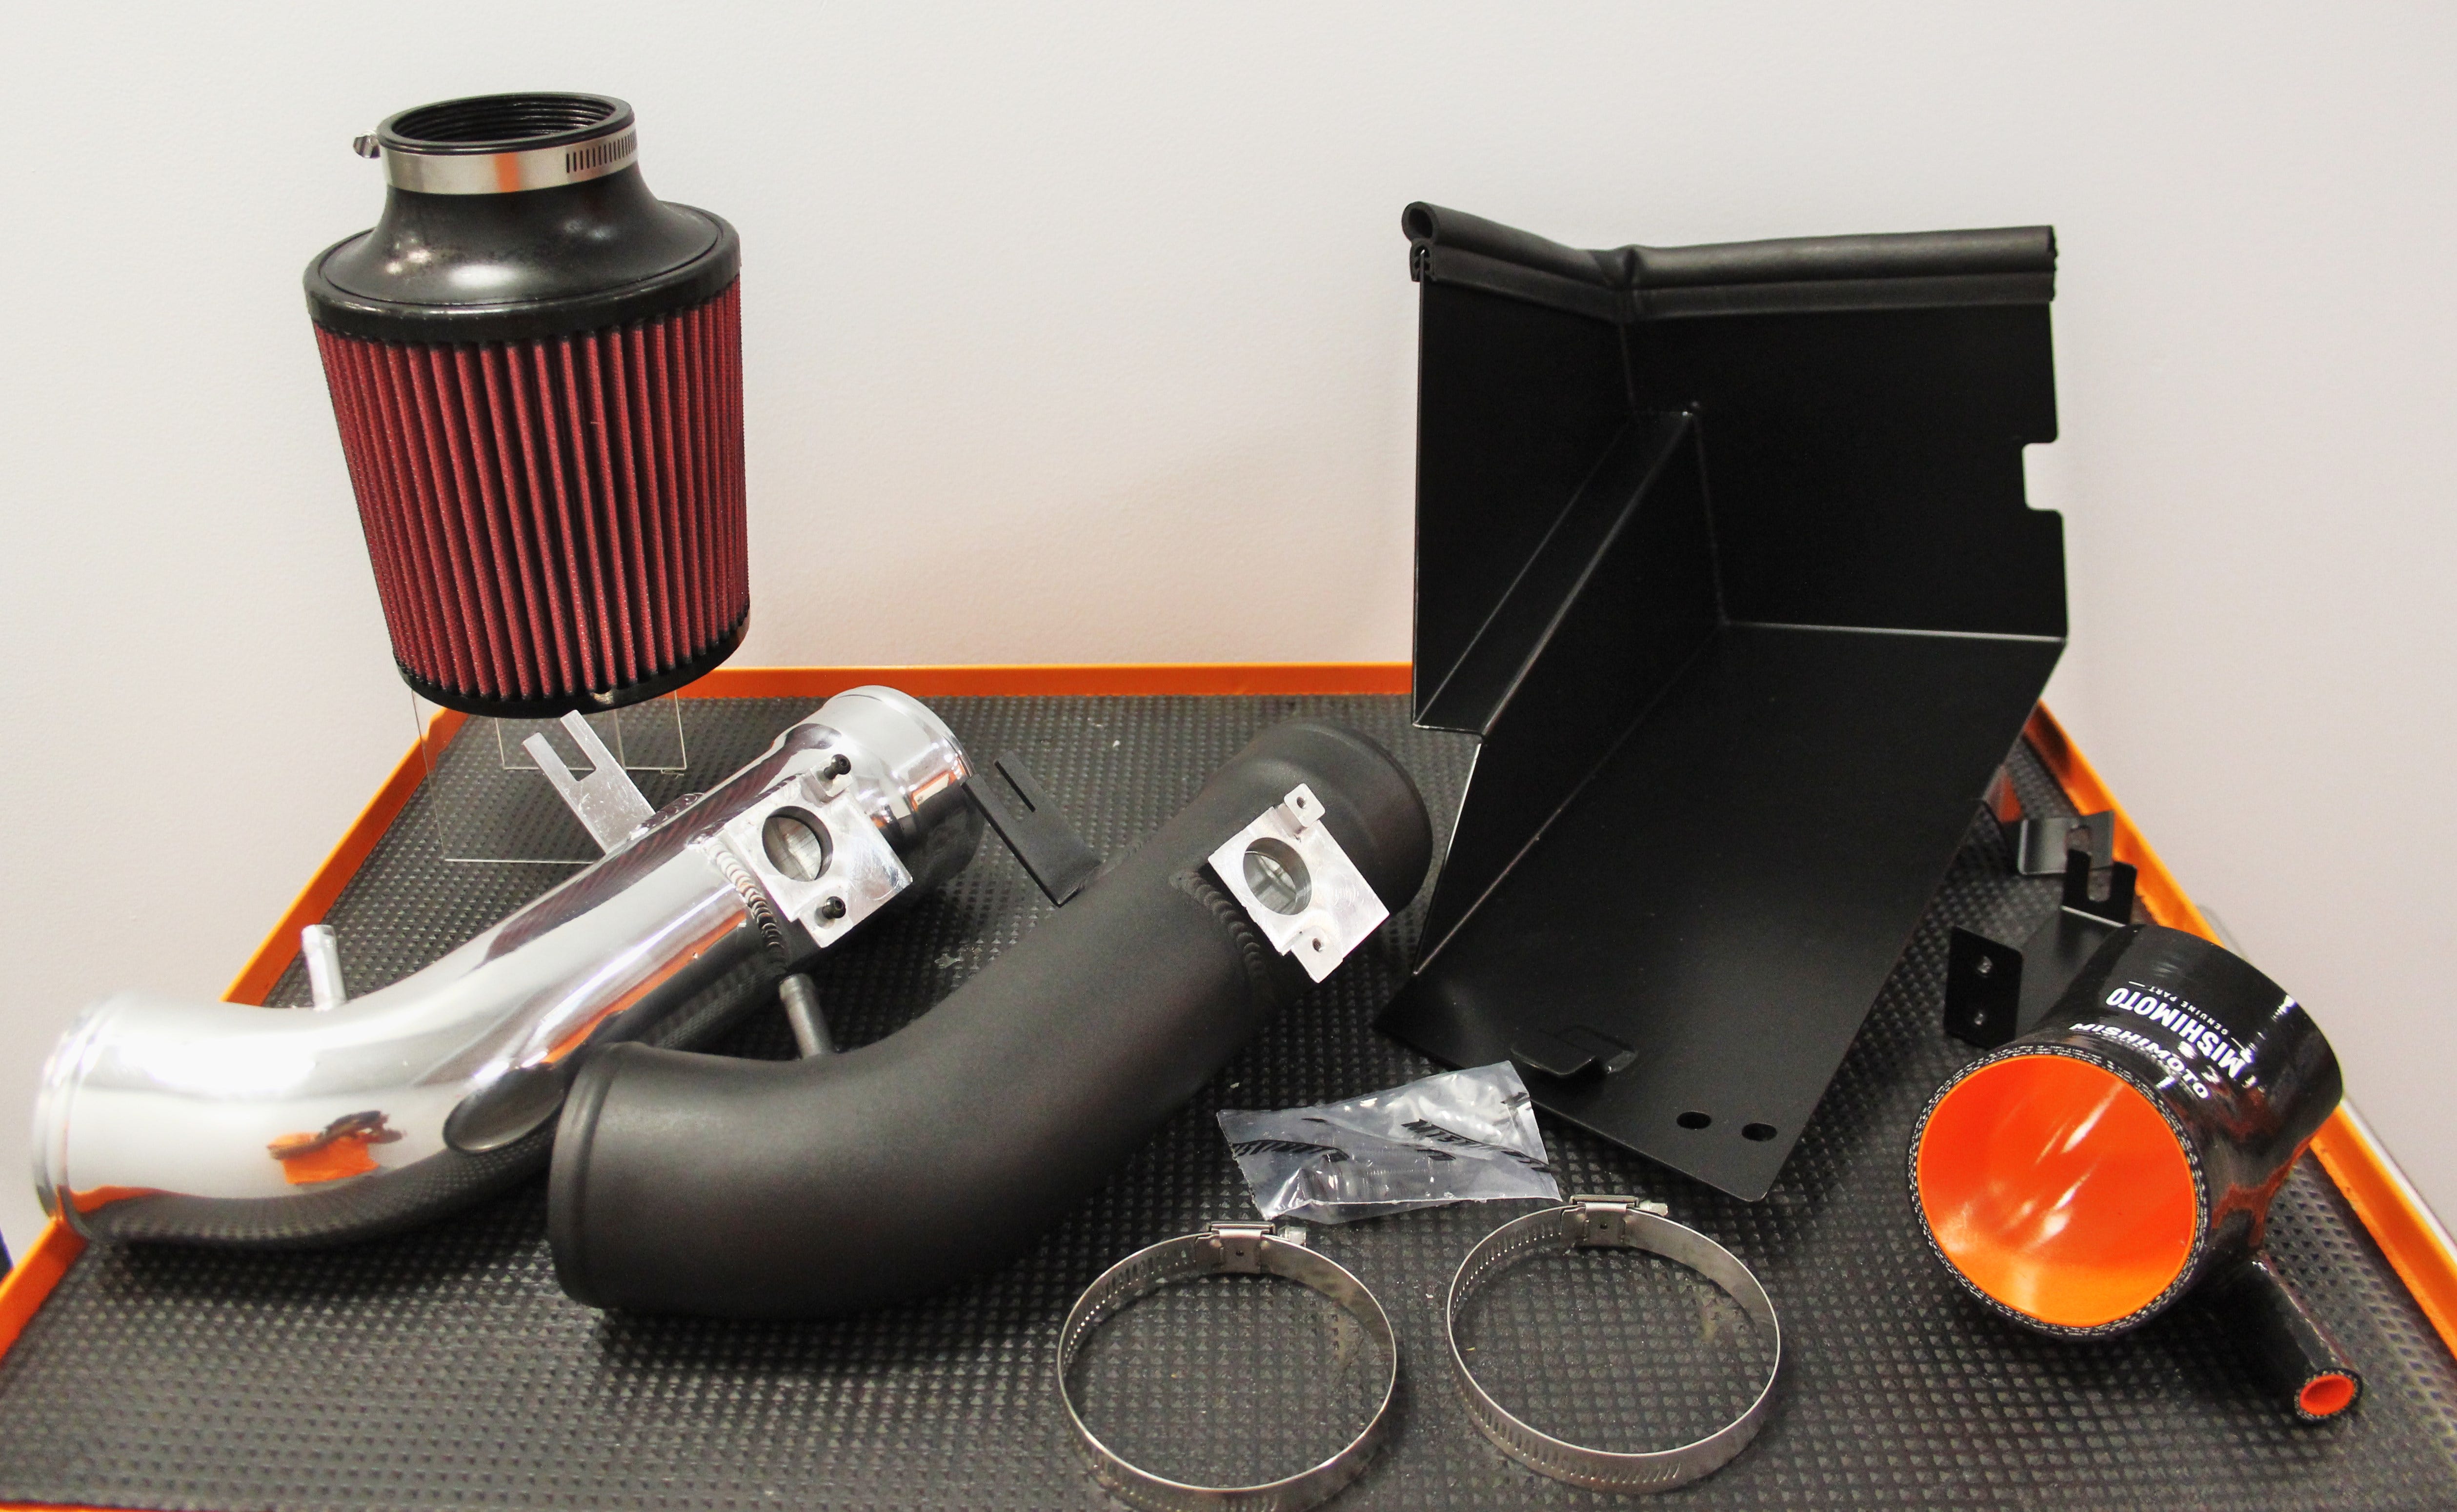 8th Generation Civic Si Intake Development, Part 3: Final Product Design